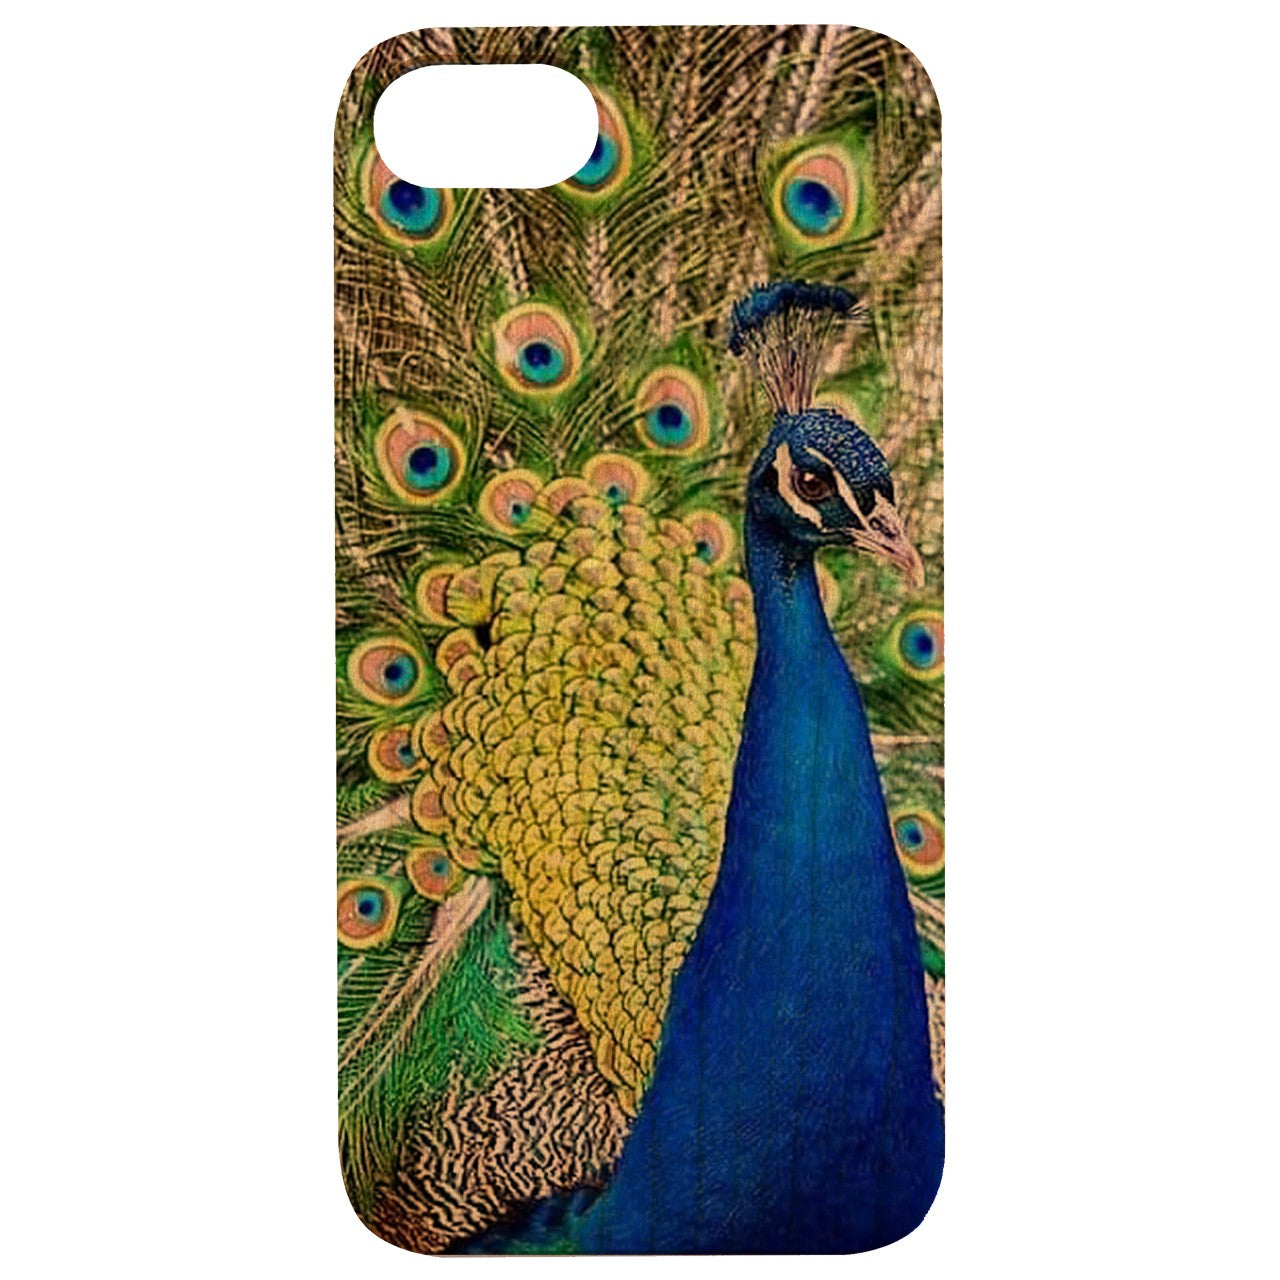  Peacock - UV Color Printed - Wooden Phone Case - IPhone 13 Models